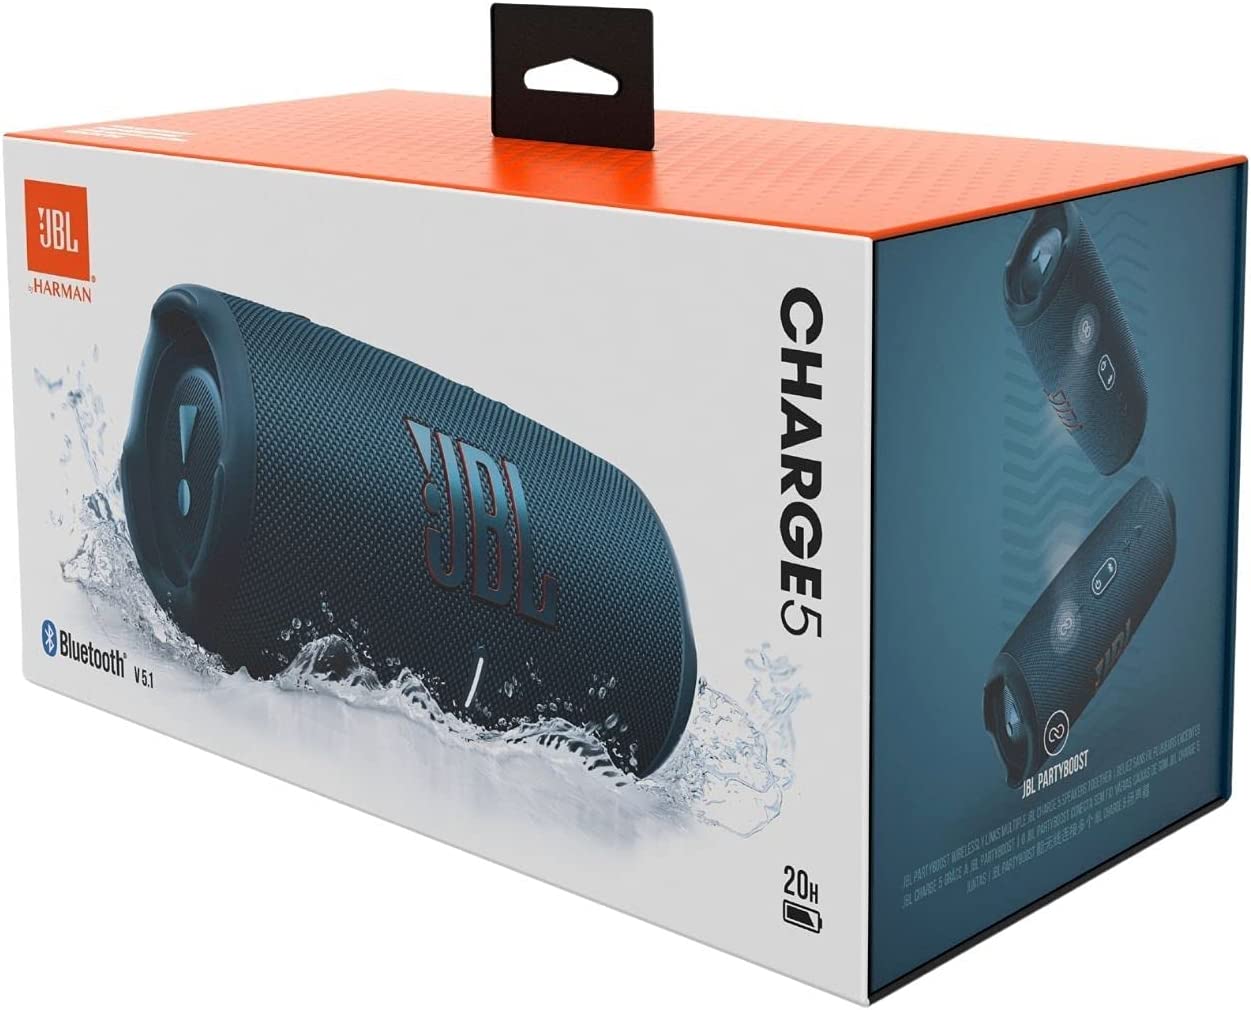 JBL CHARGE 5 - Portable Bluetooth Speaker with IP67 Waterproof and USB Charge